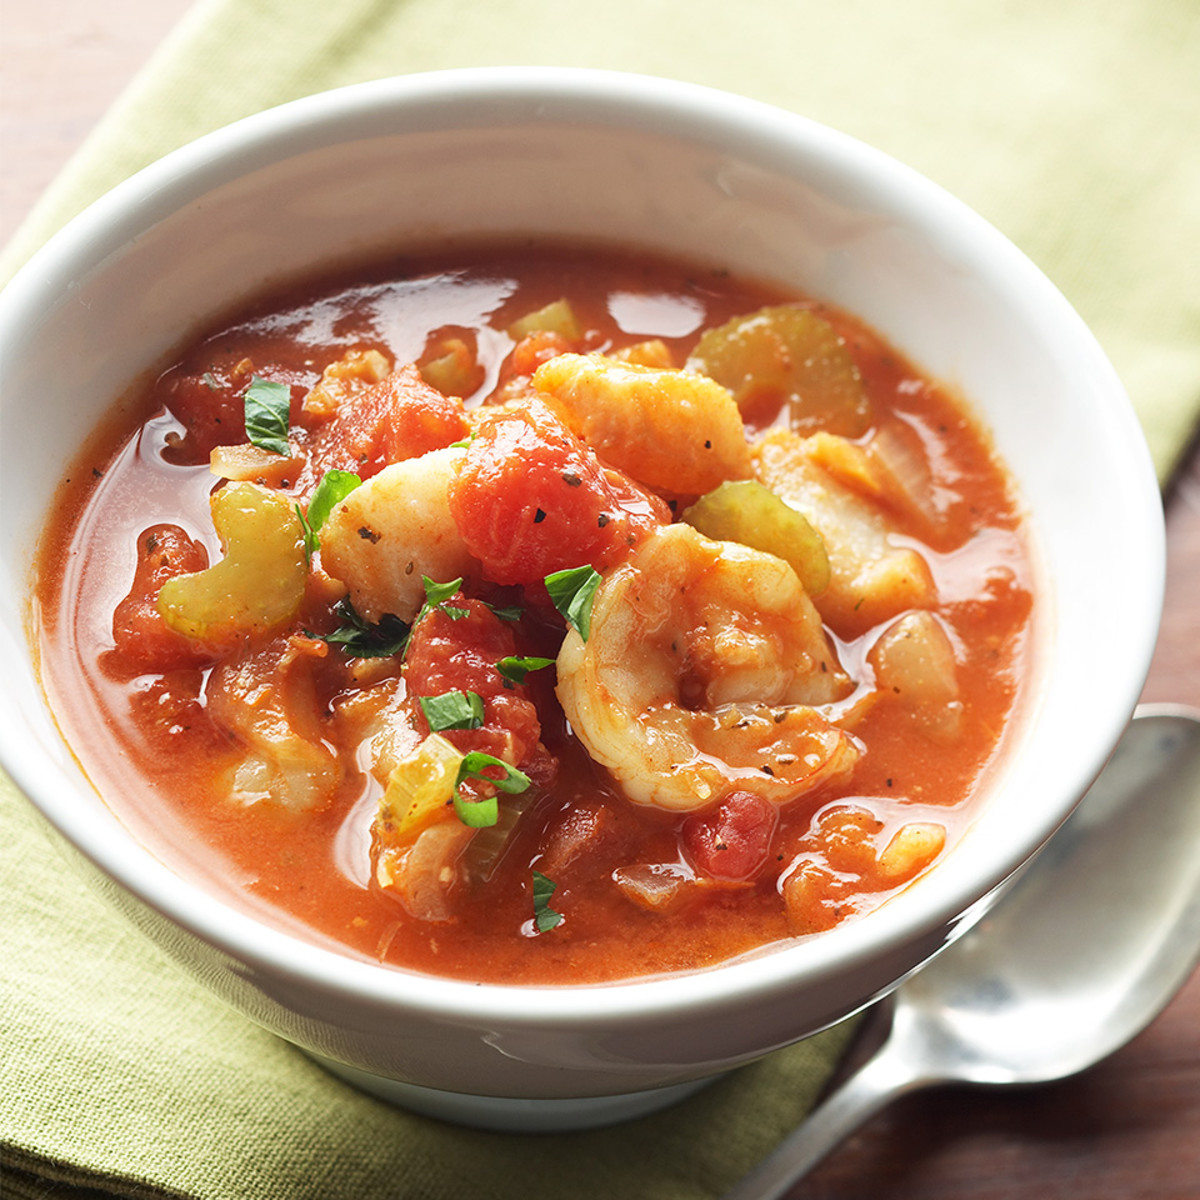 Fish Stew Recipes for Winter